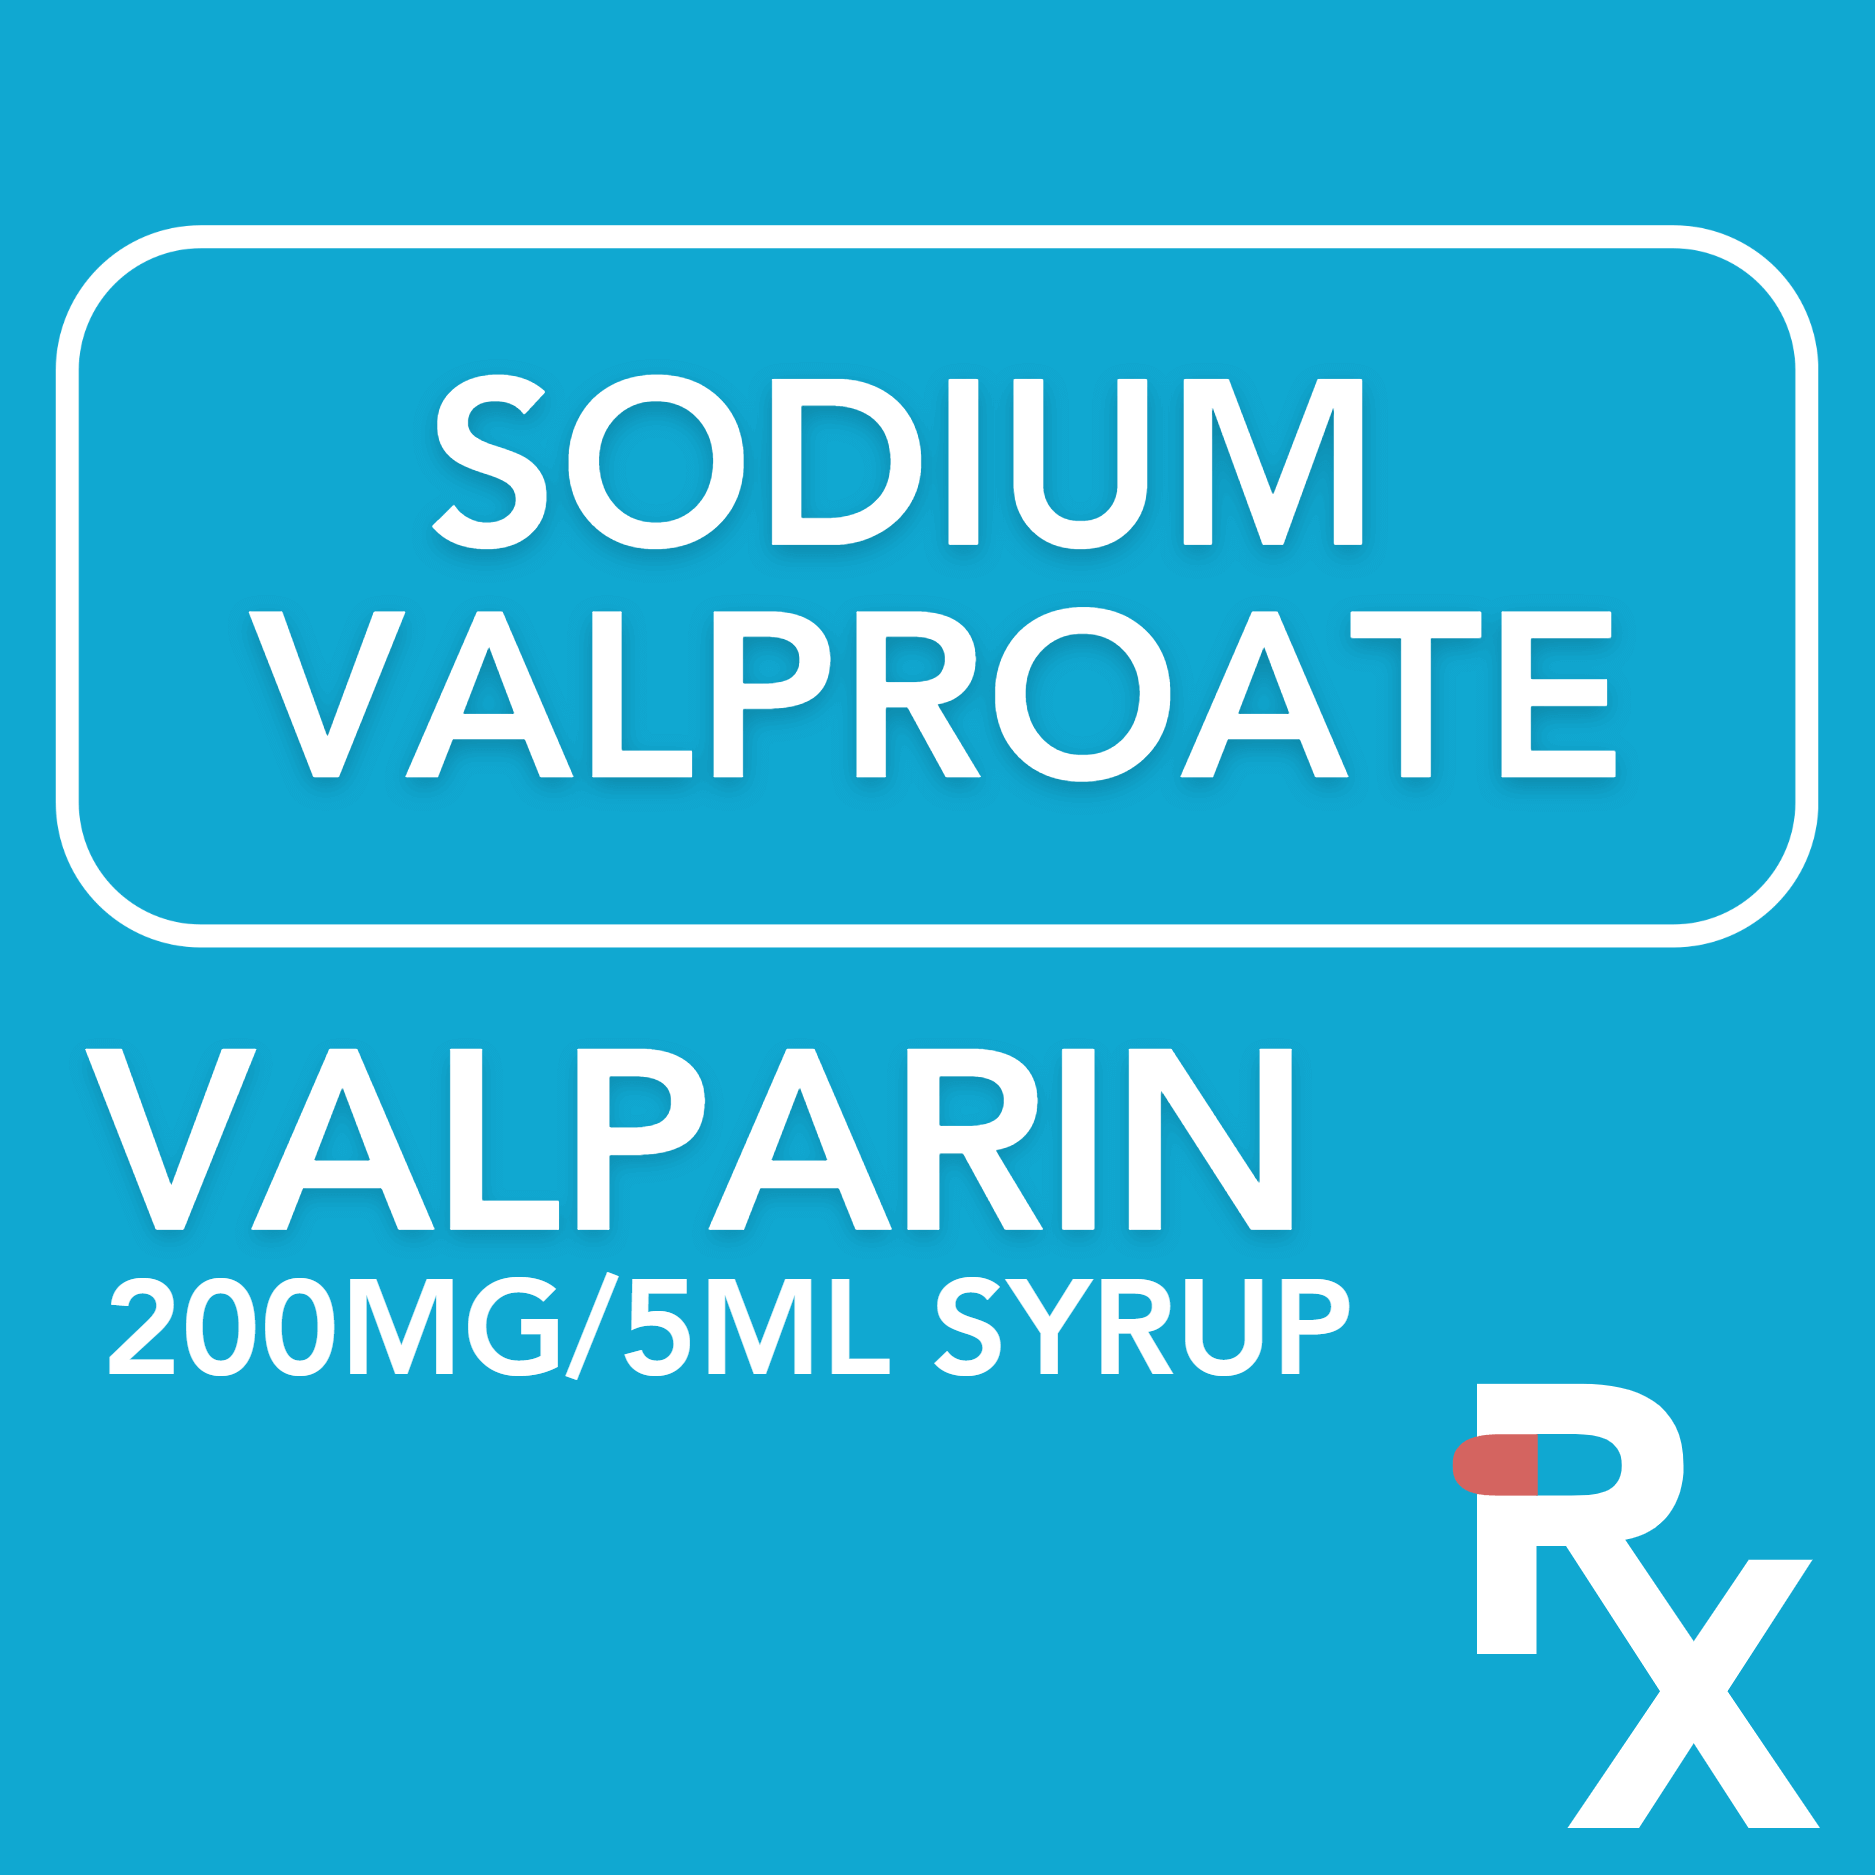 valparin 200mg/5mg online at best price in philippines